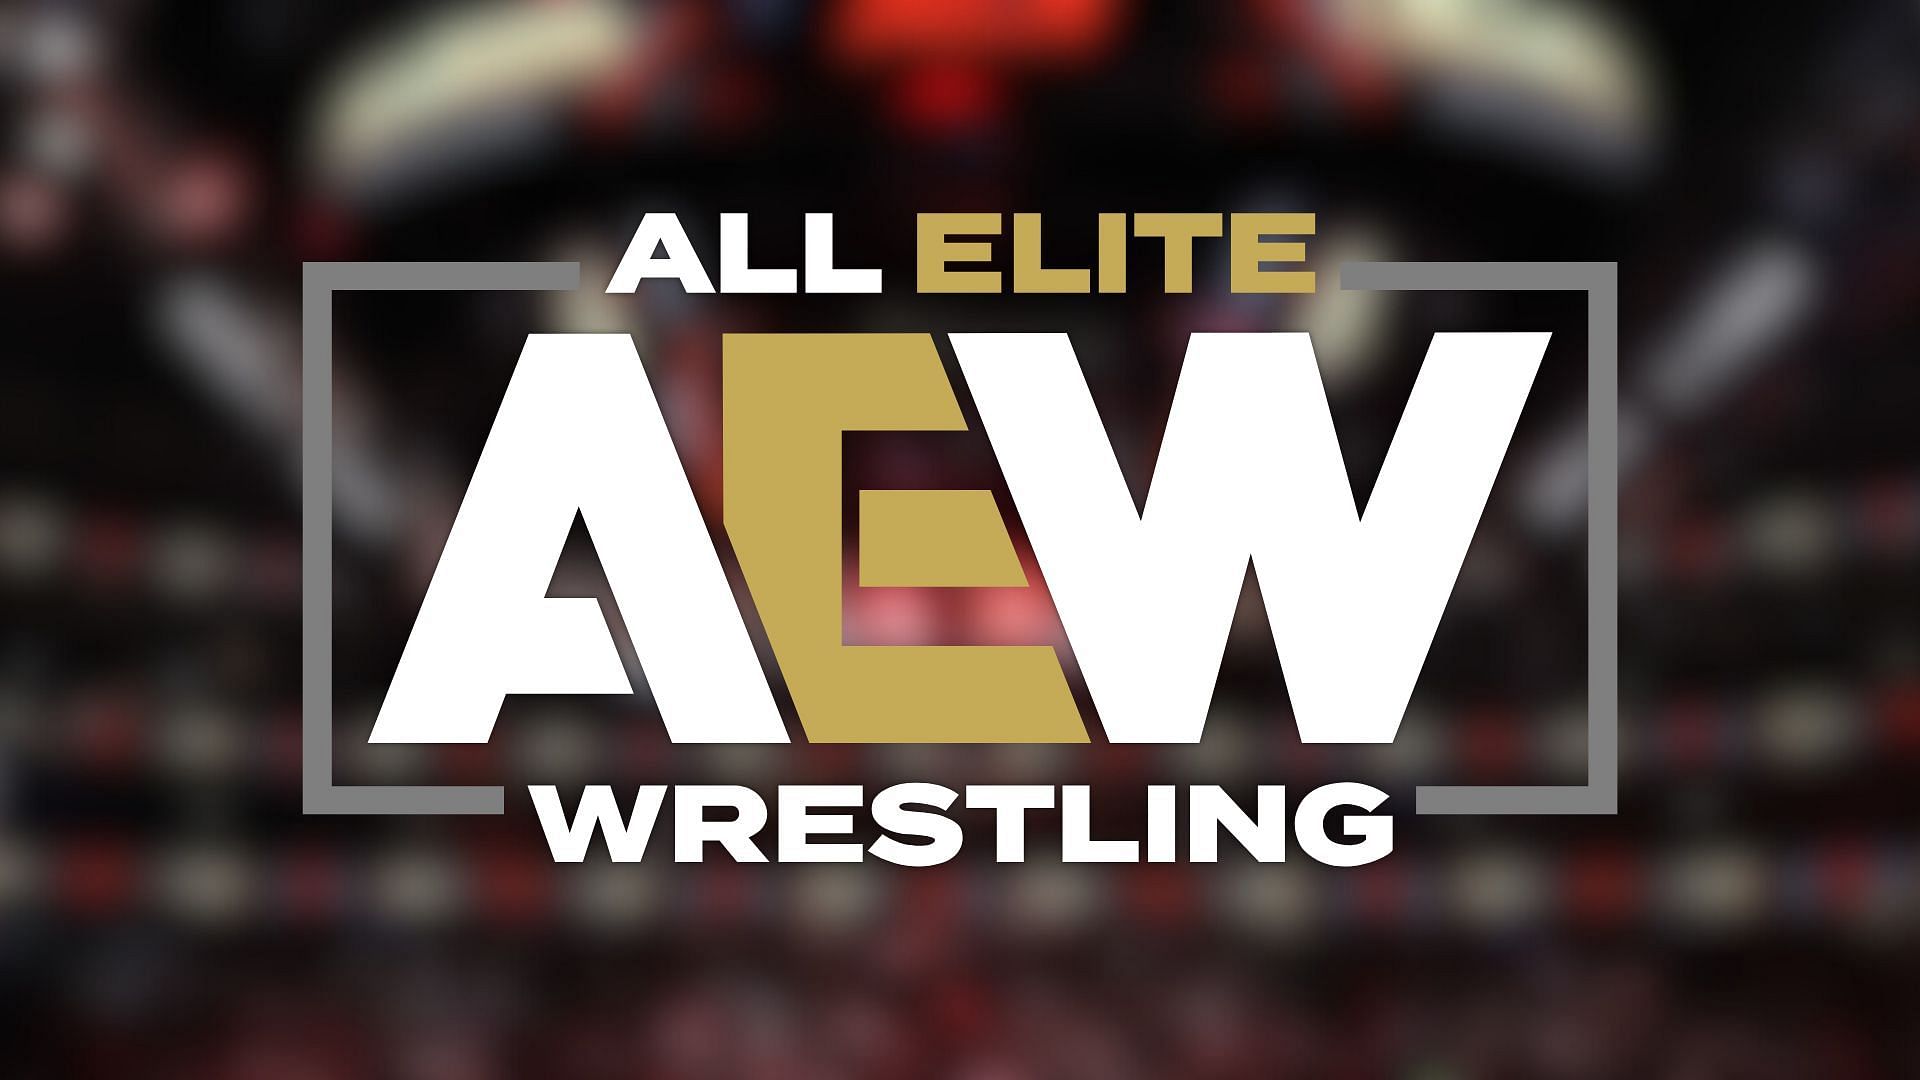 Which AEW star has become a double champion?